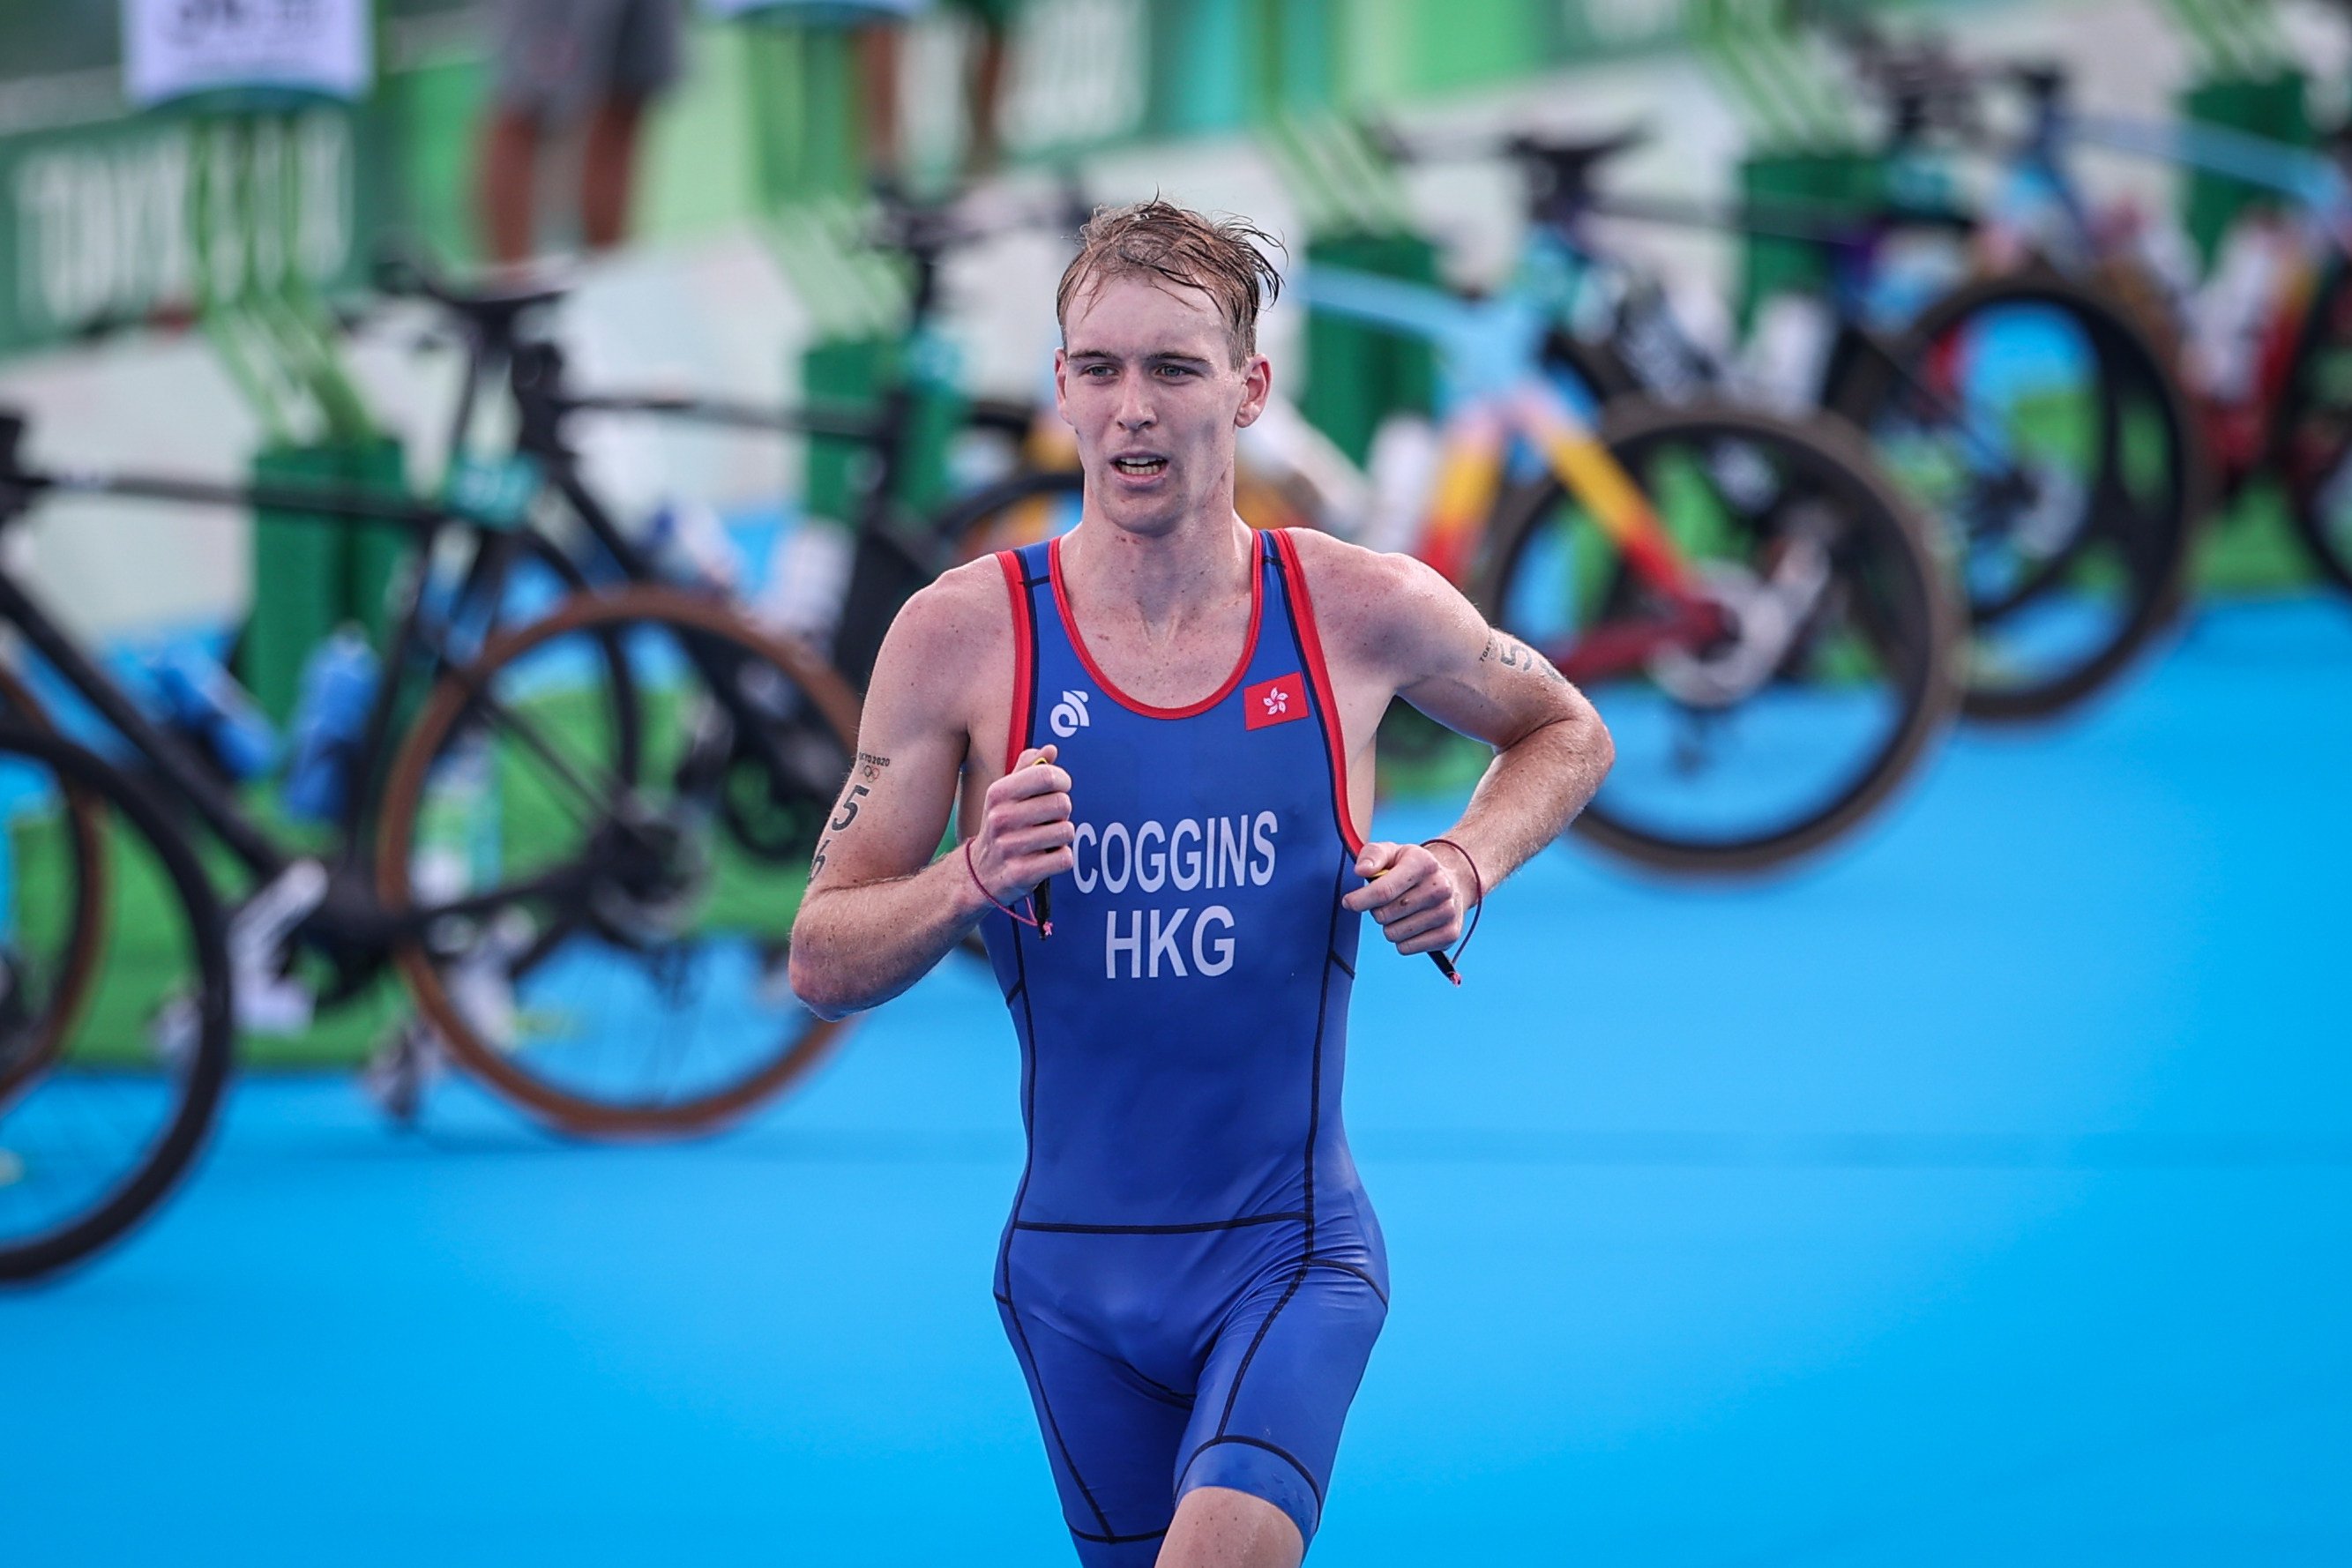 Coggins became Hong Kong’s leading Olympic triathlete after finishing 33rd at the Tokyo Games. Photo: Xinhua